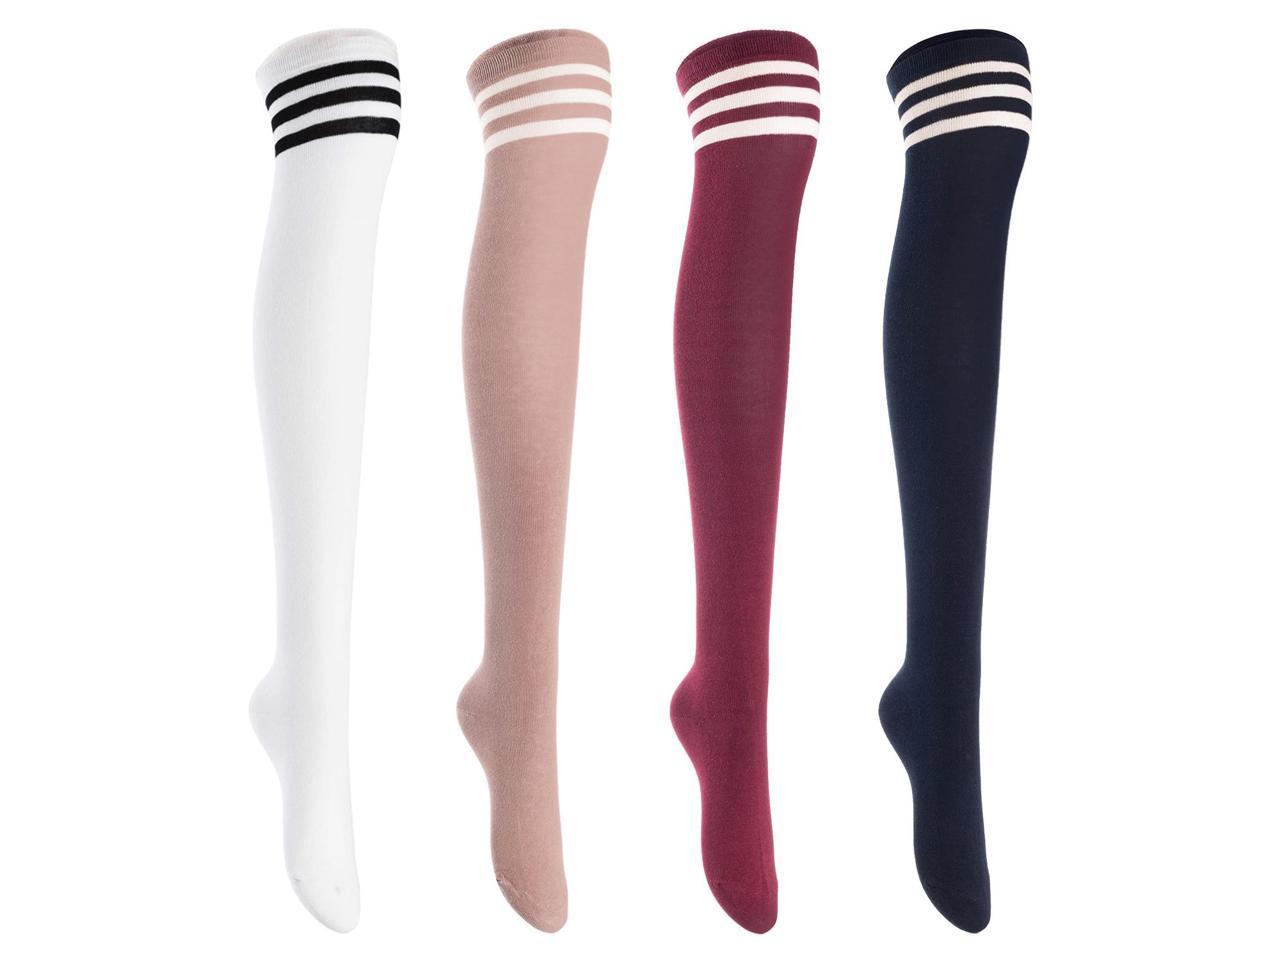 Lian LifeStyle Women S Pairs Adorable Super Comfortable And Ultra Soft Thigh High Natural